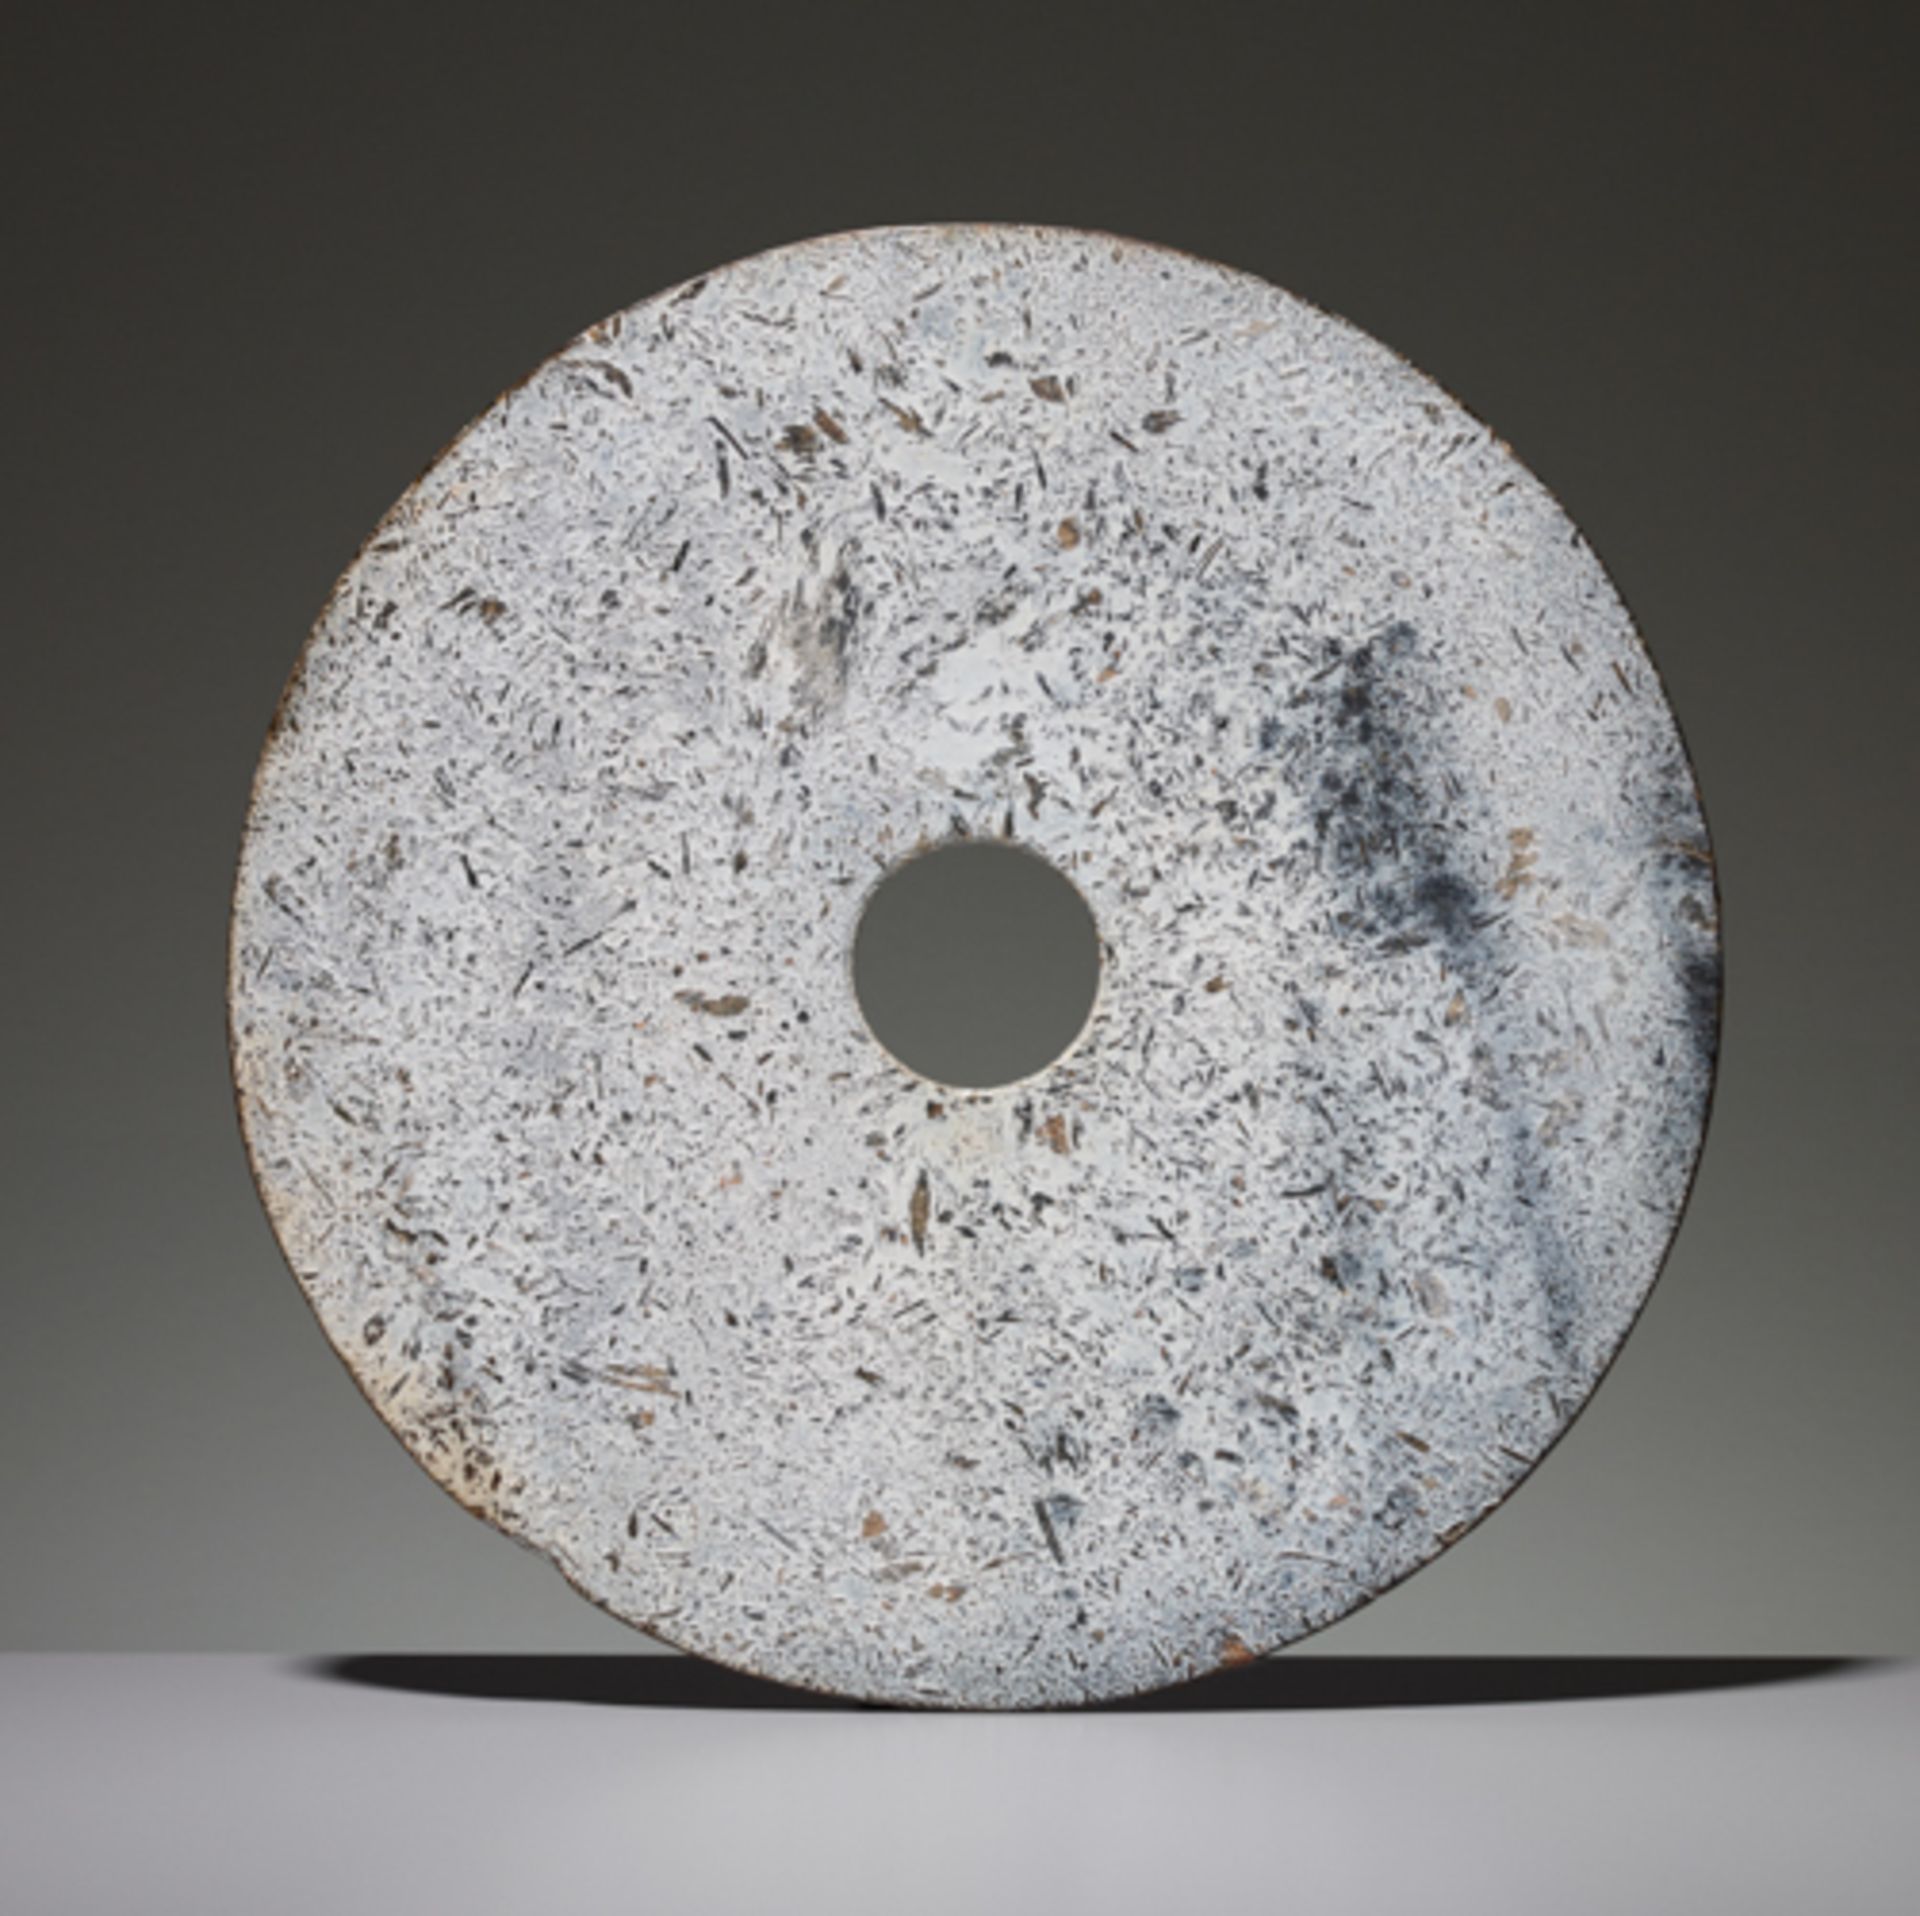 BI DISC Jade. China, Late Neolithic period, early Bronze age, c. 2000 BC This large bi disc has such